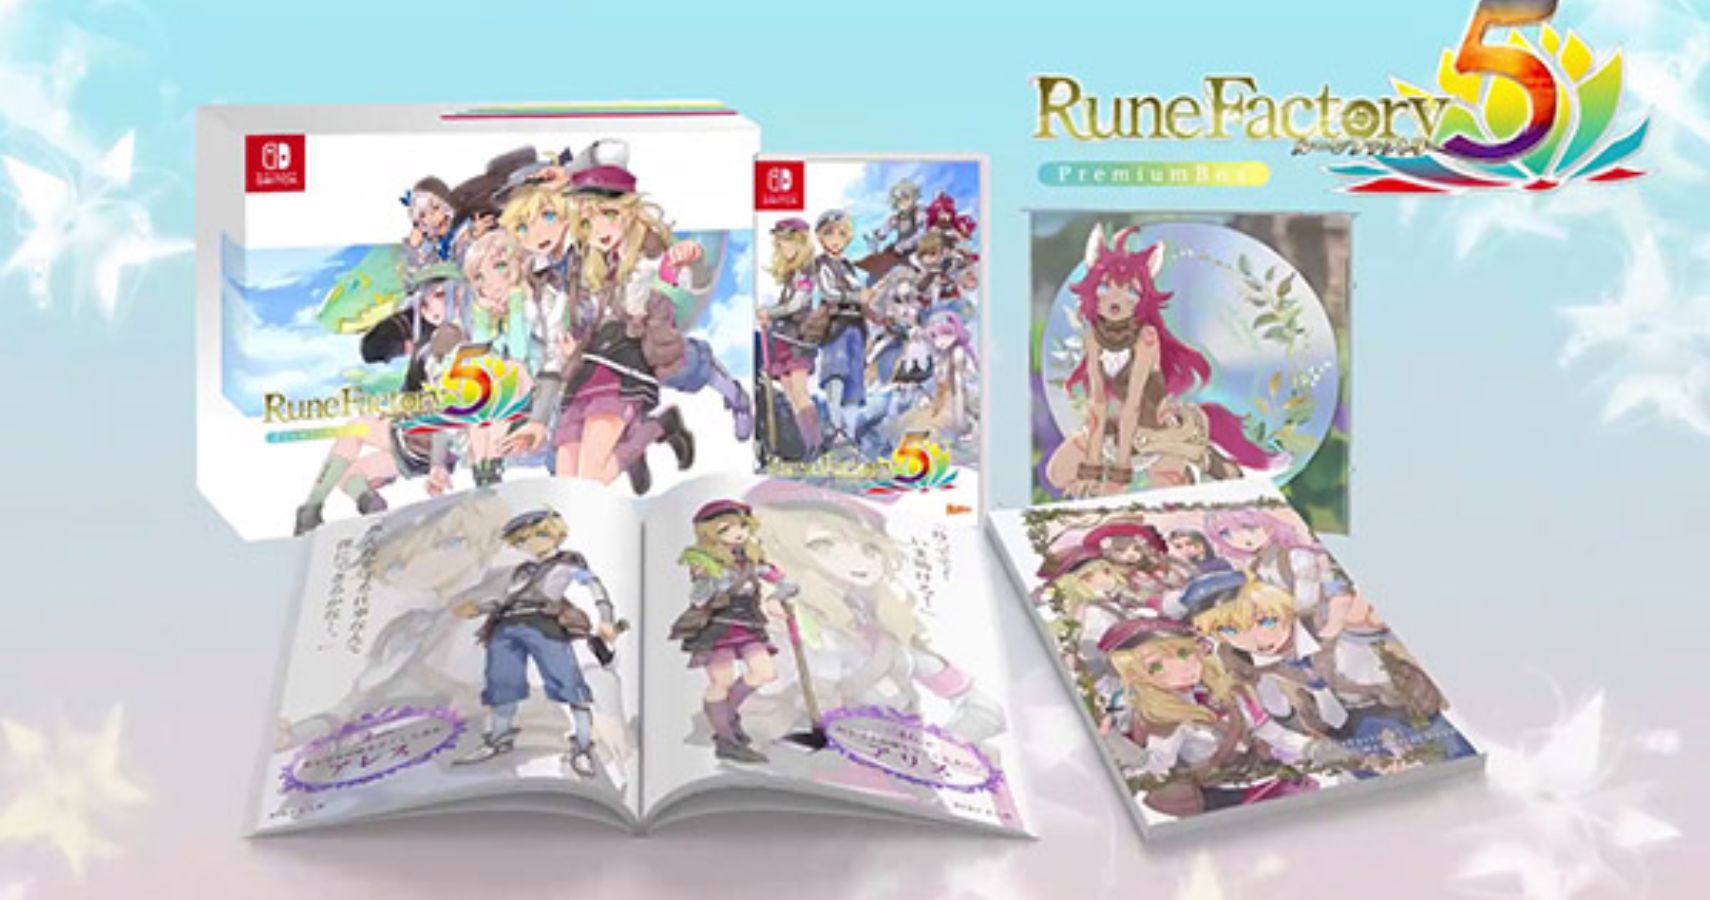 rune factory 4 special edition